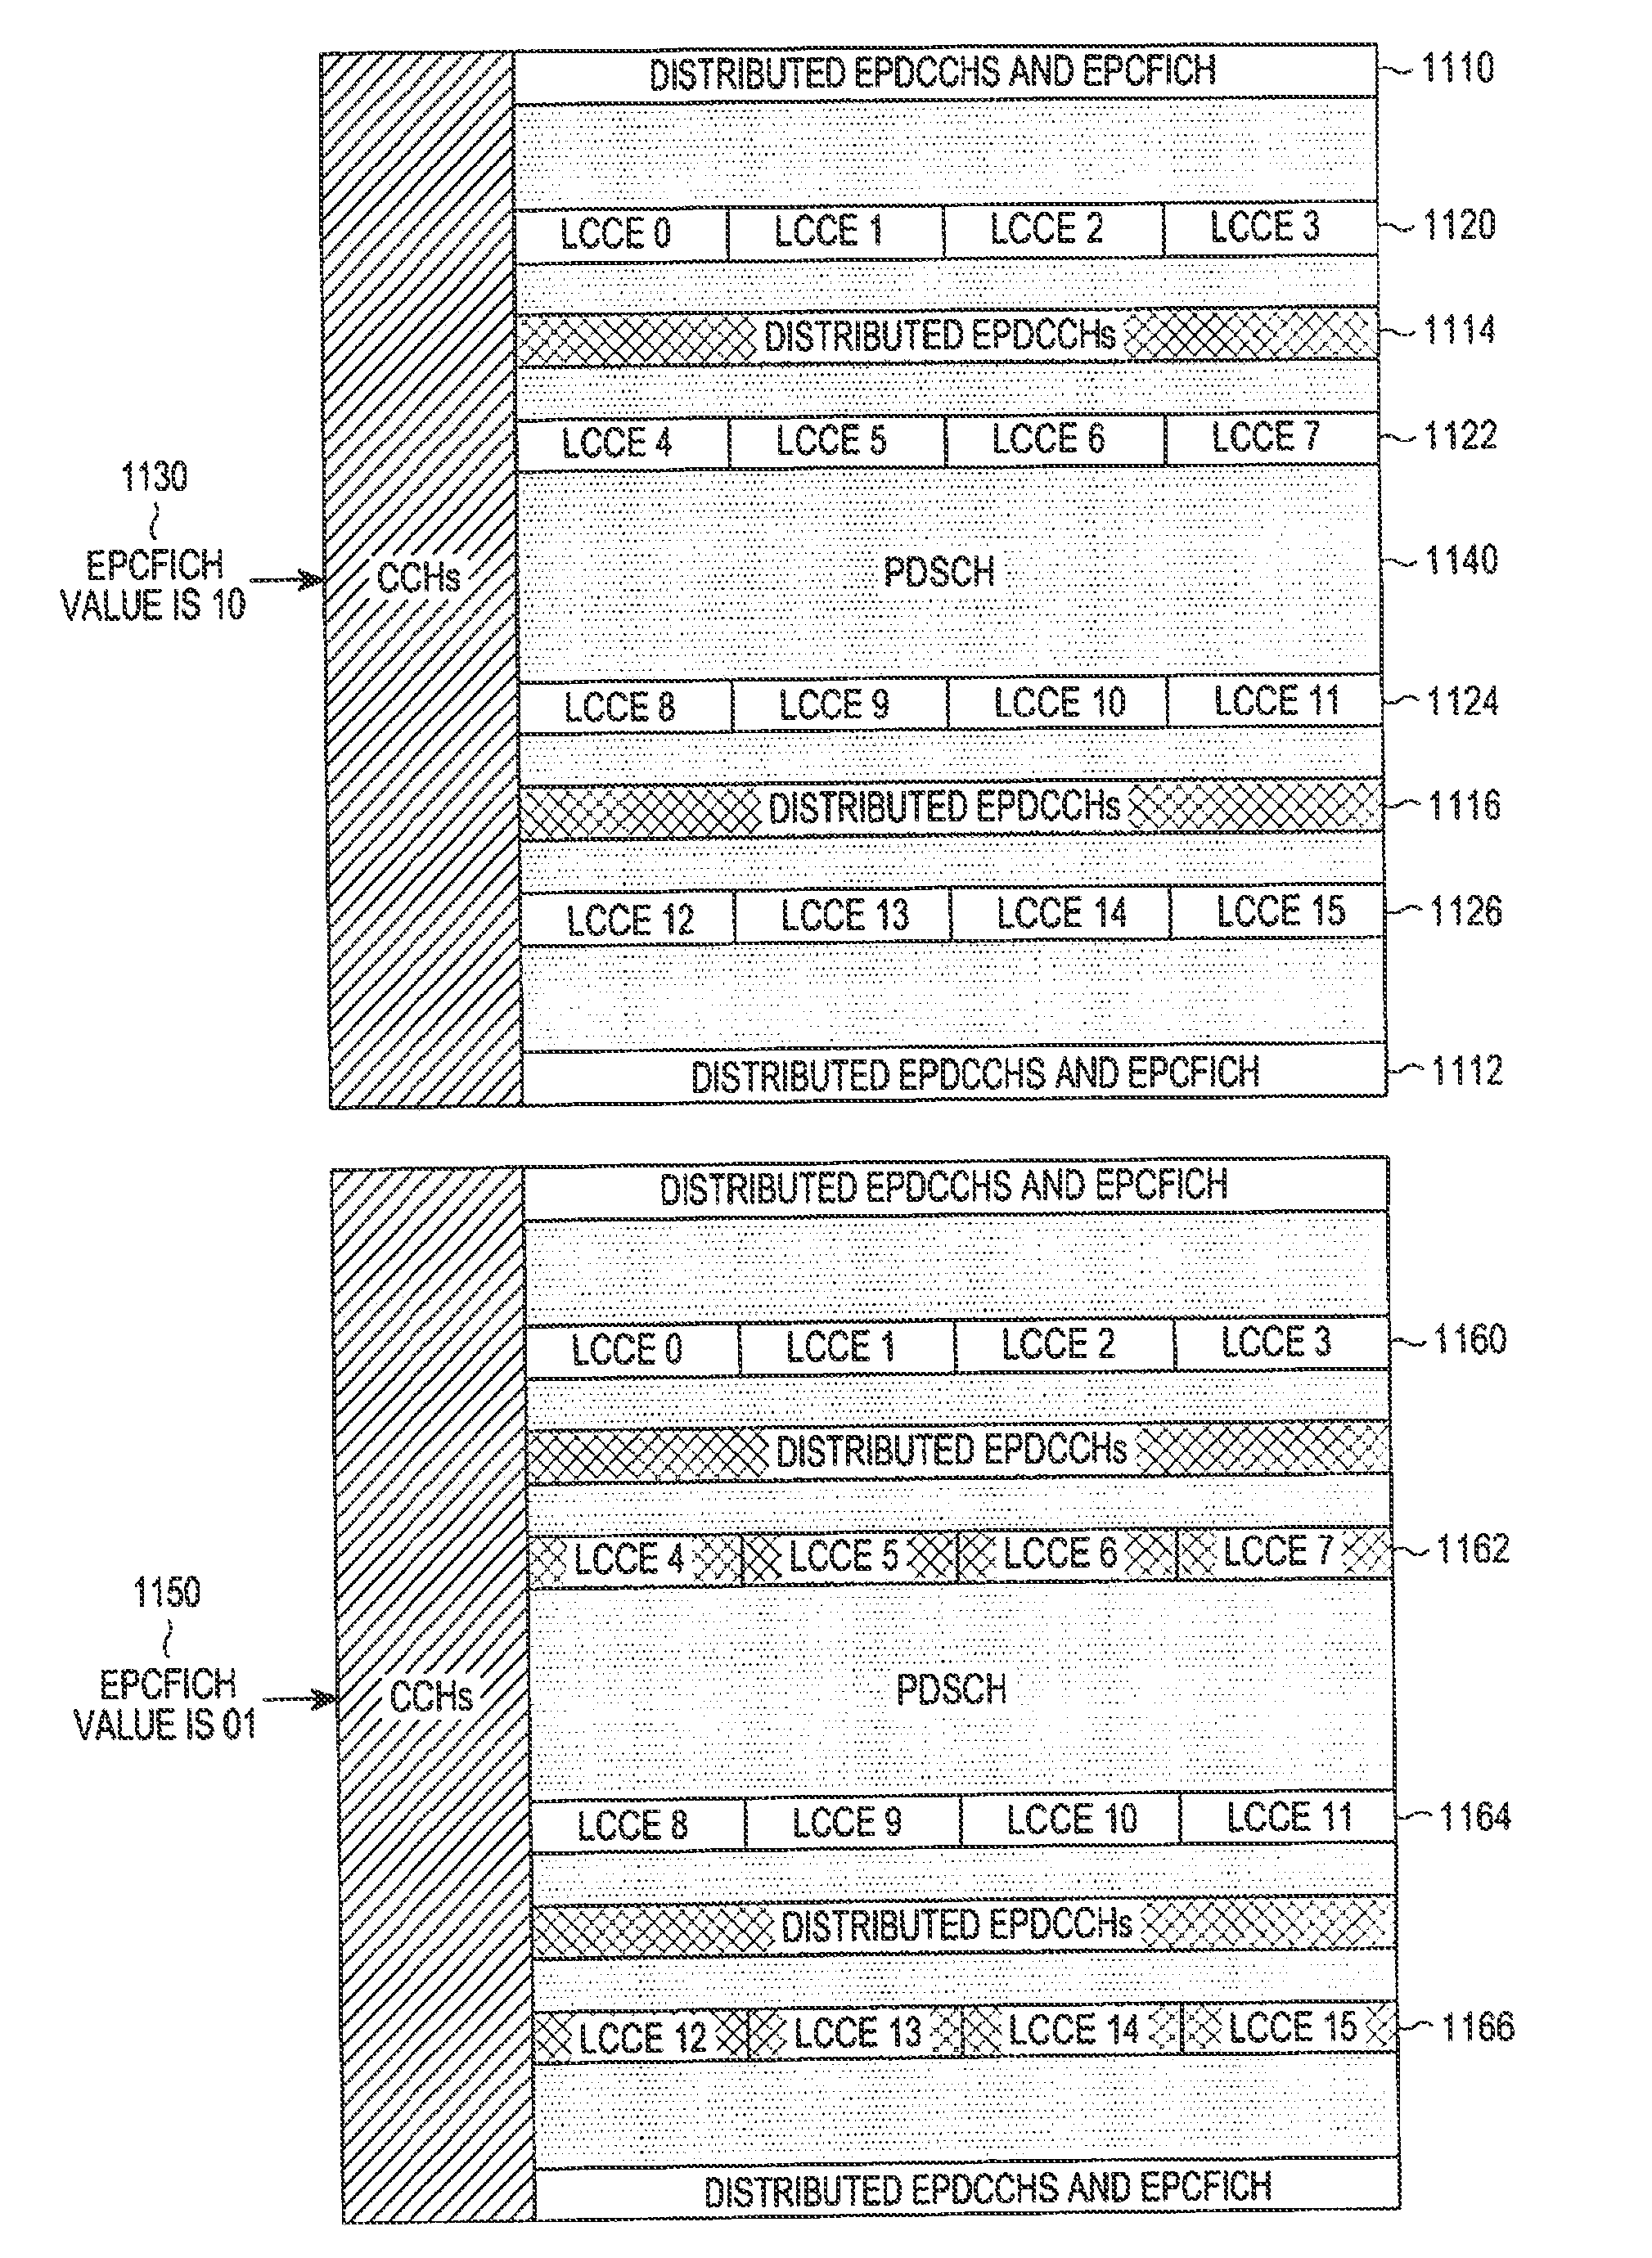 Harq-ack signal transmission in response to detection of control channel type in case of multiple control channel types